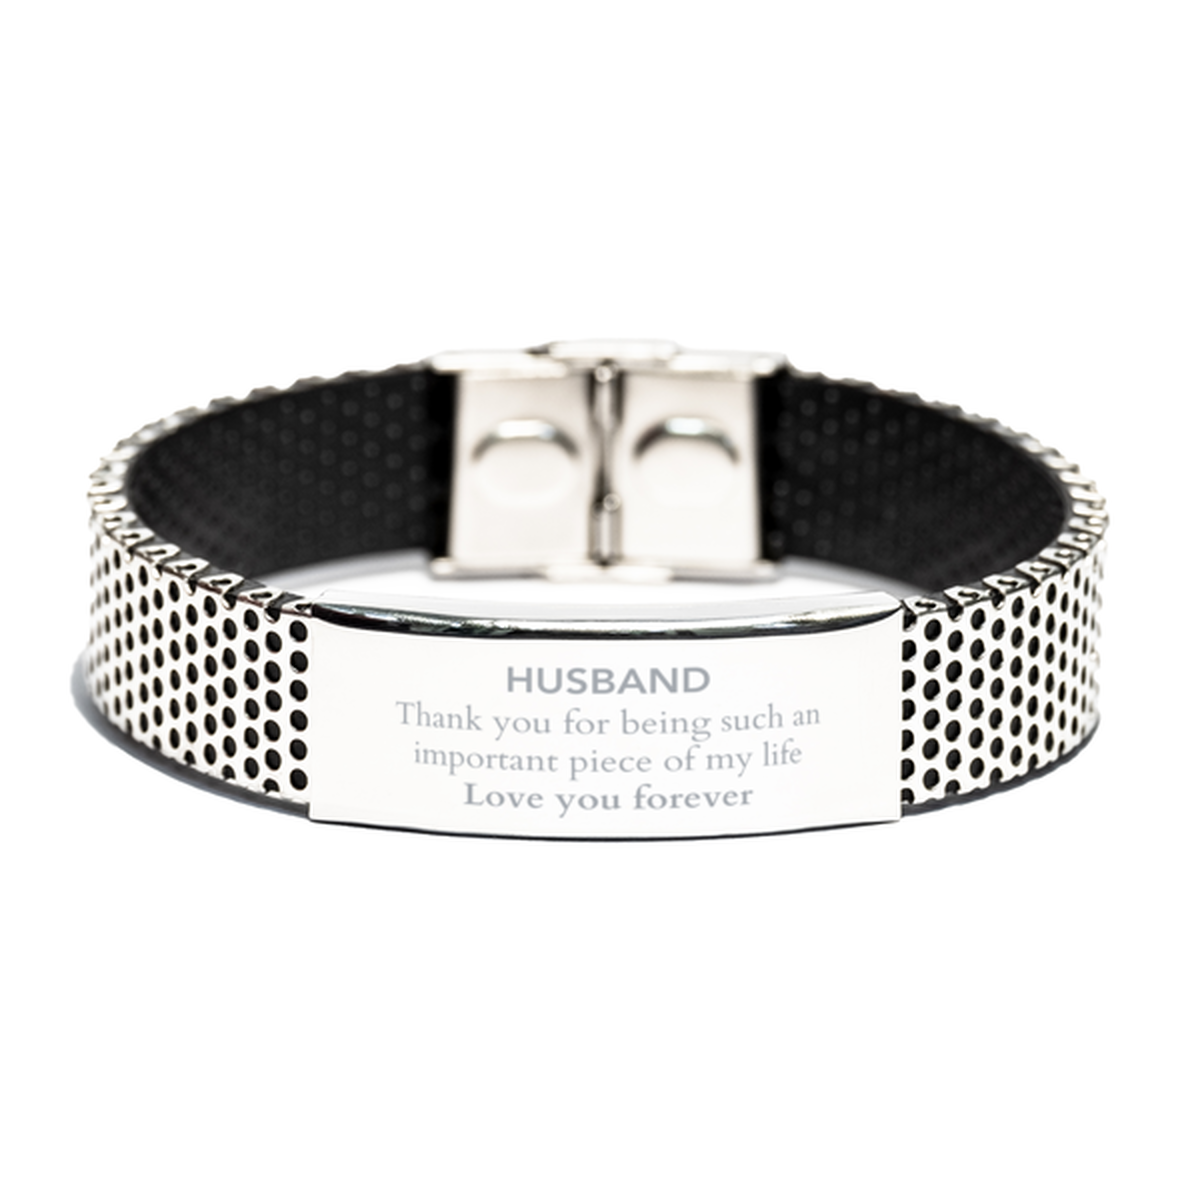 Appropriate Husband Stainless Steel Bracelet Epic Birthday Gifts for Husband Thank you for being such an important piece of my life Husband Christmas Mothers Fathers Day